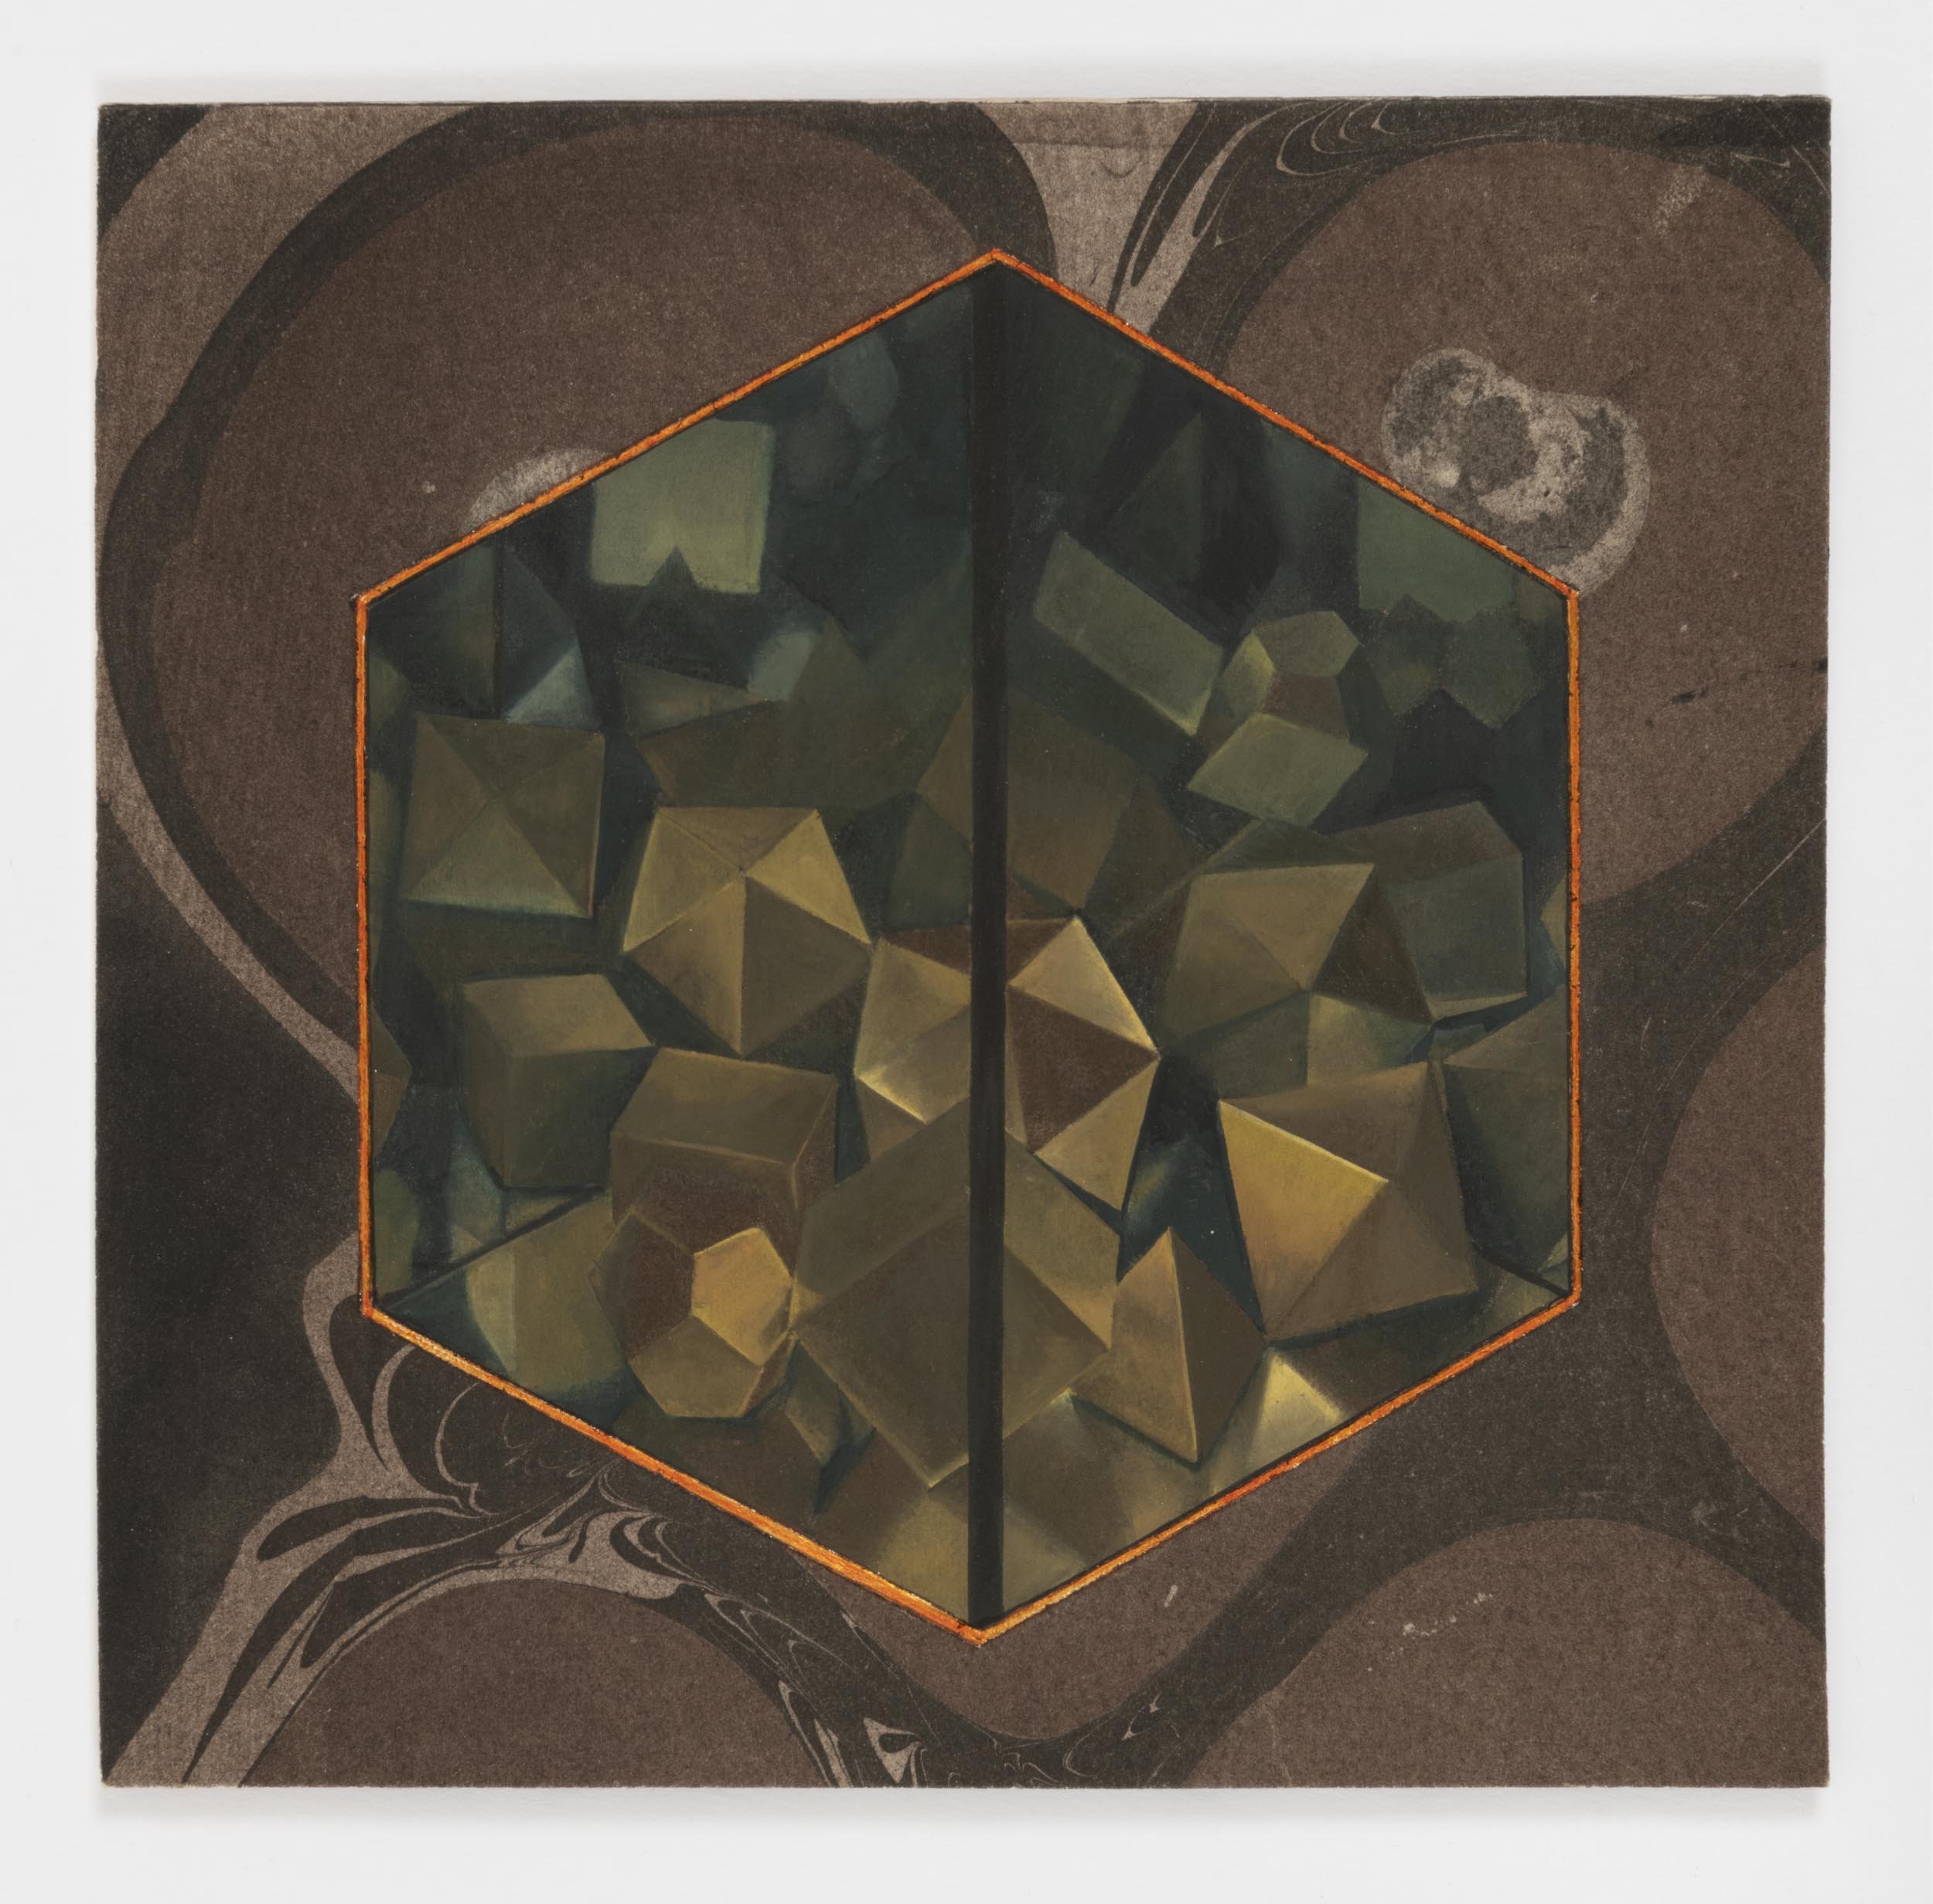  Mirrored Cube 3, 2021 gouache with toned aluminum leaf on paper 7 x 7 in. &nbsp; 18 x 18 cm. 